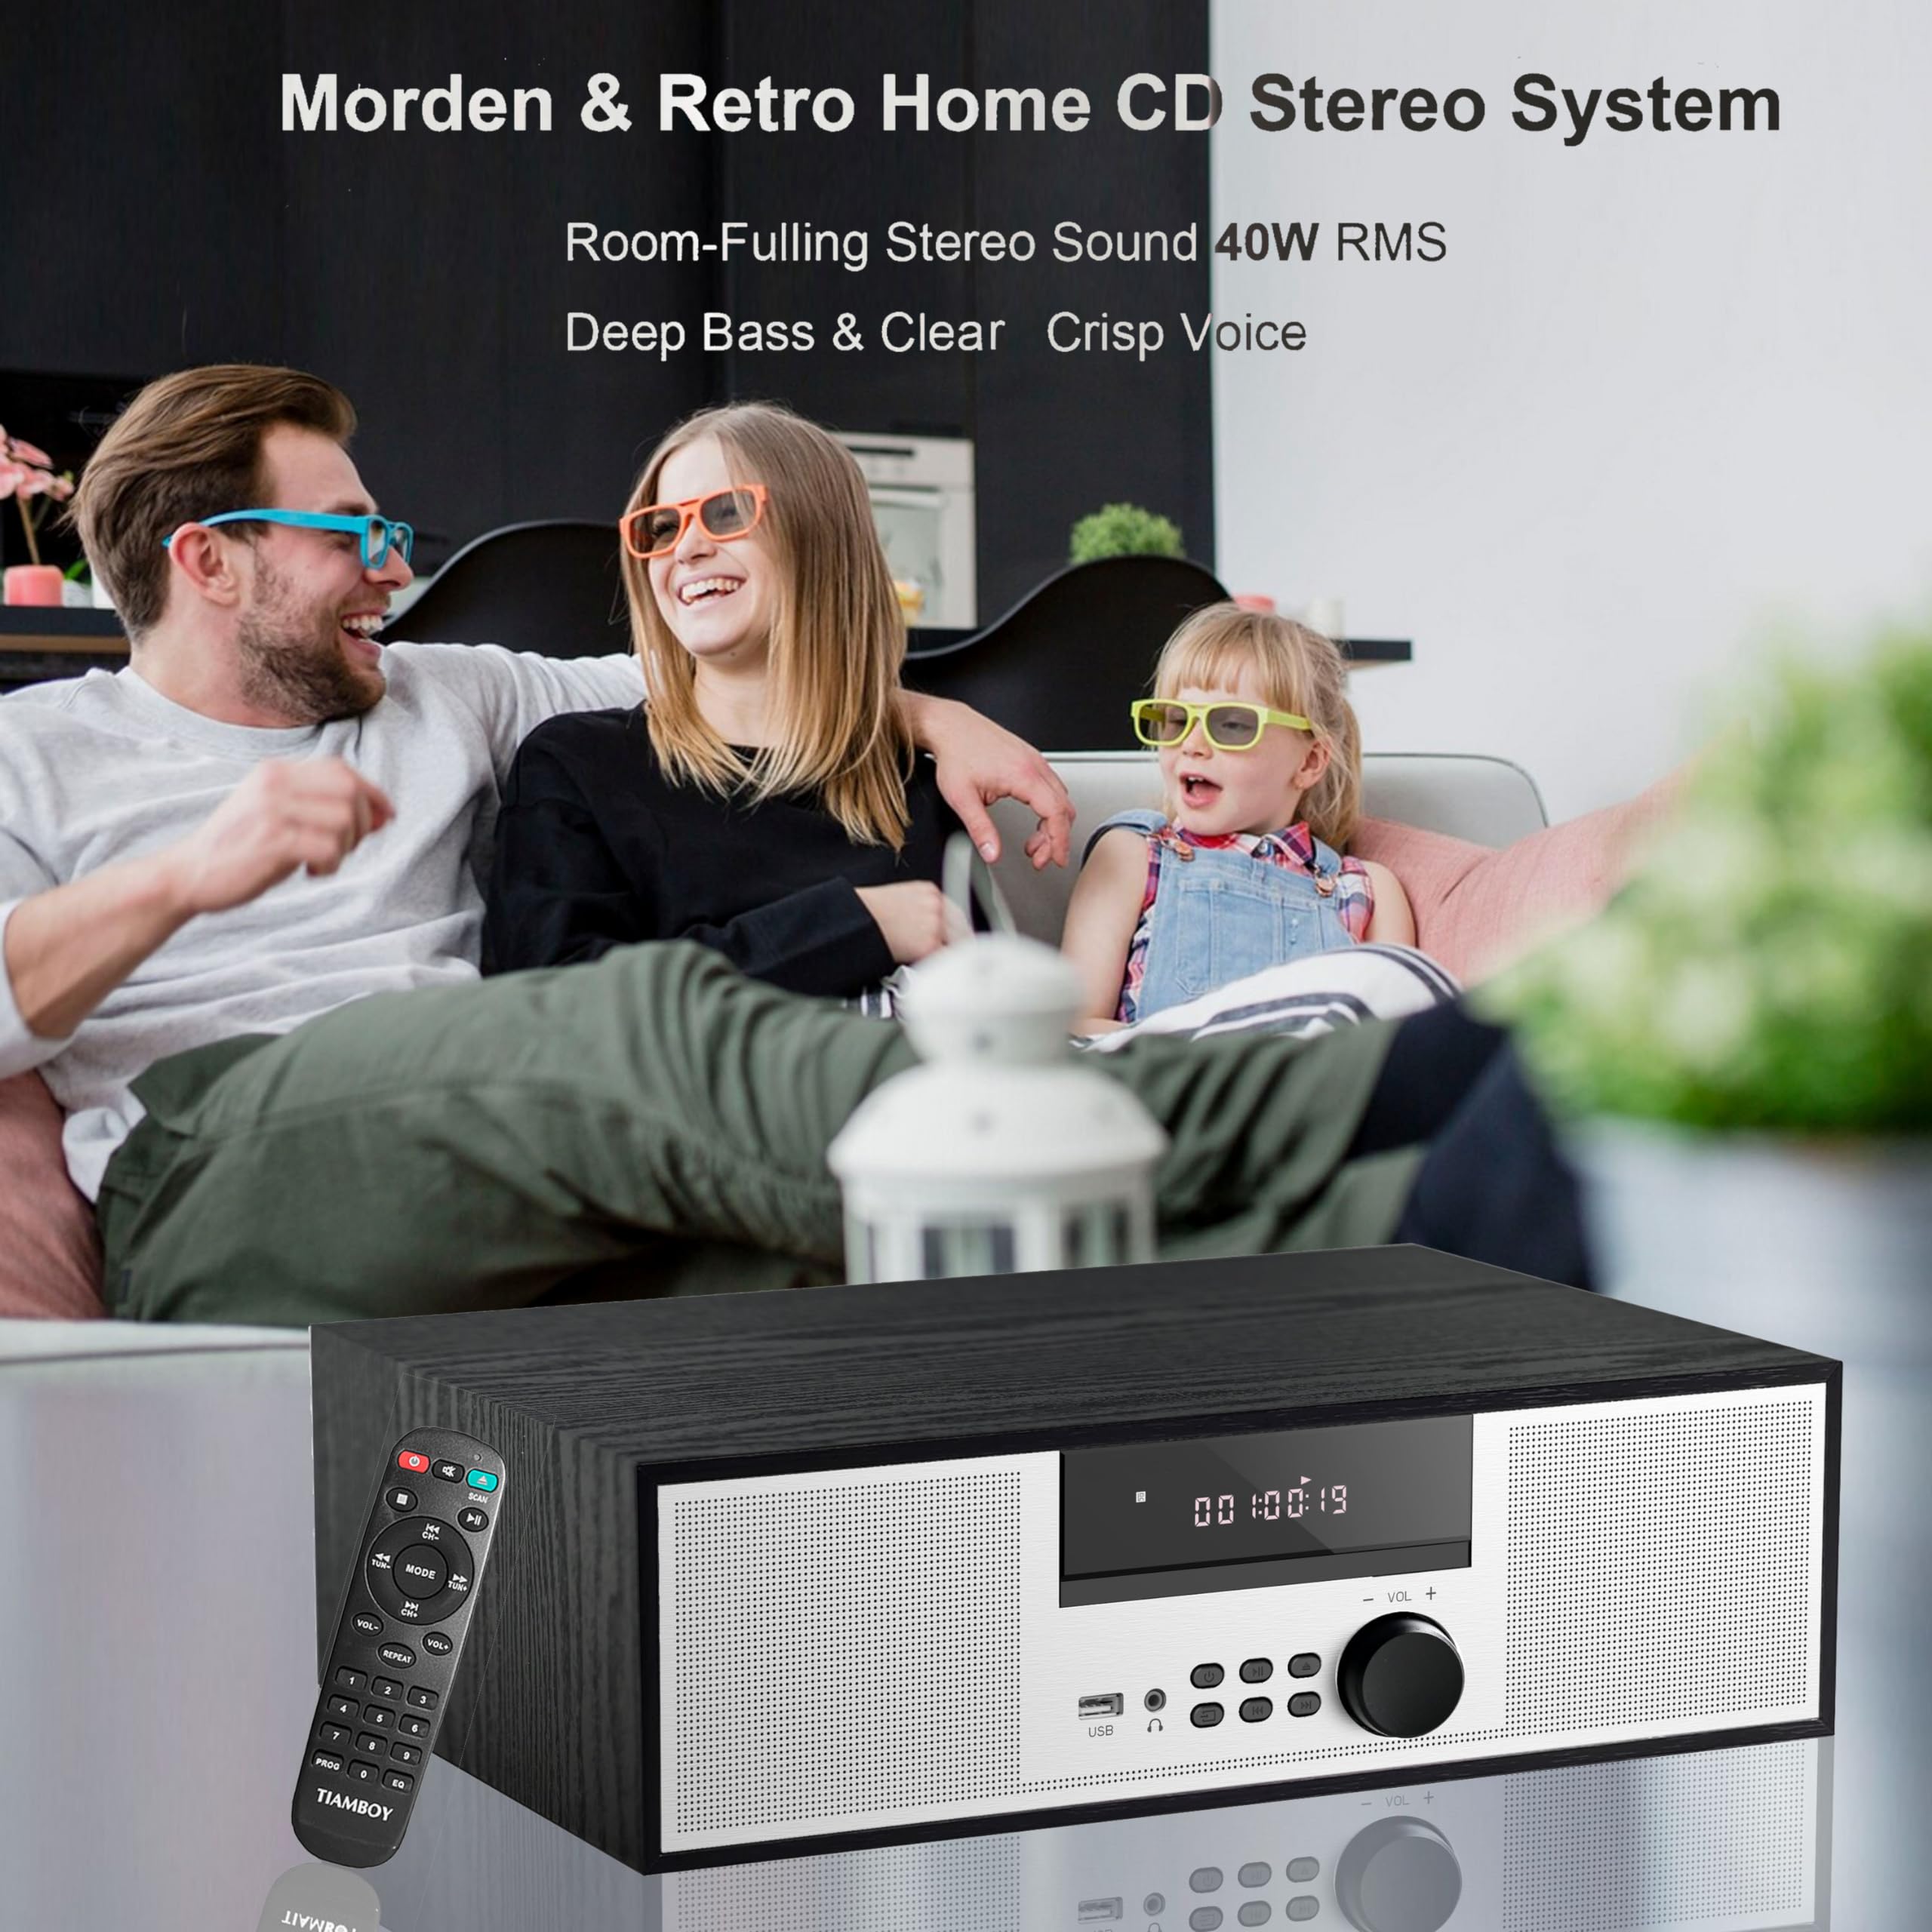 Vintage Home CD Stereo System, 40W RMS Micro Component with CD Player, Bluetooth, USB Playback, FM Radio, AUX-in & Earhpones Output, Clear Sounds & Rich Bass (TB-816 Black)